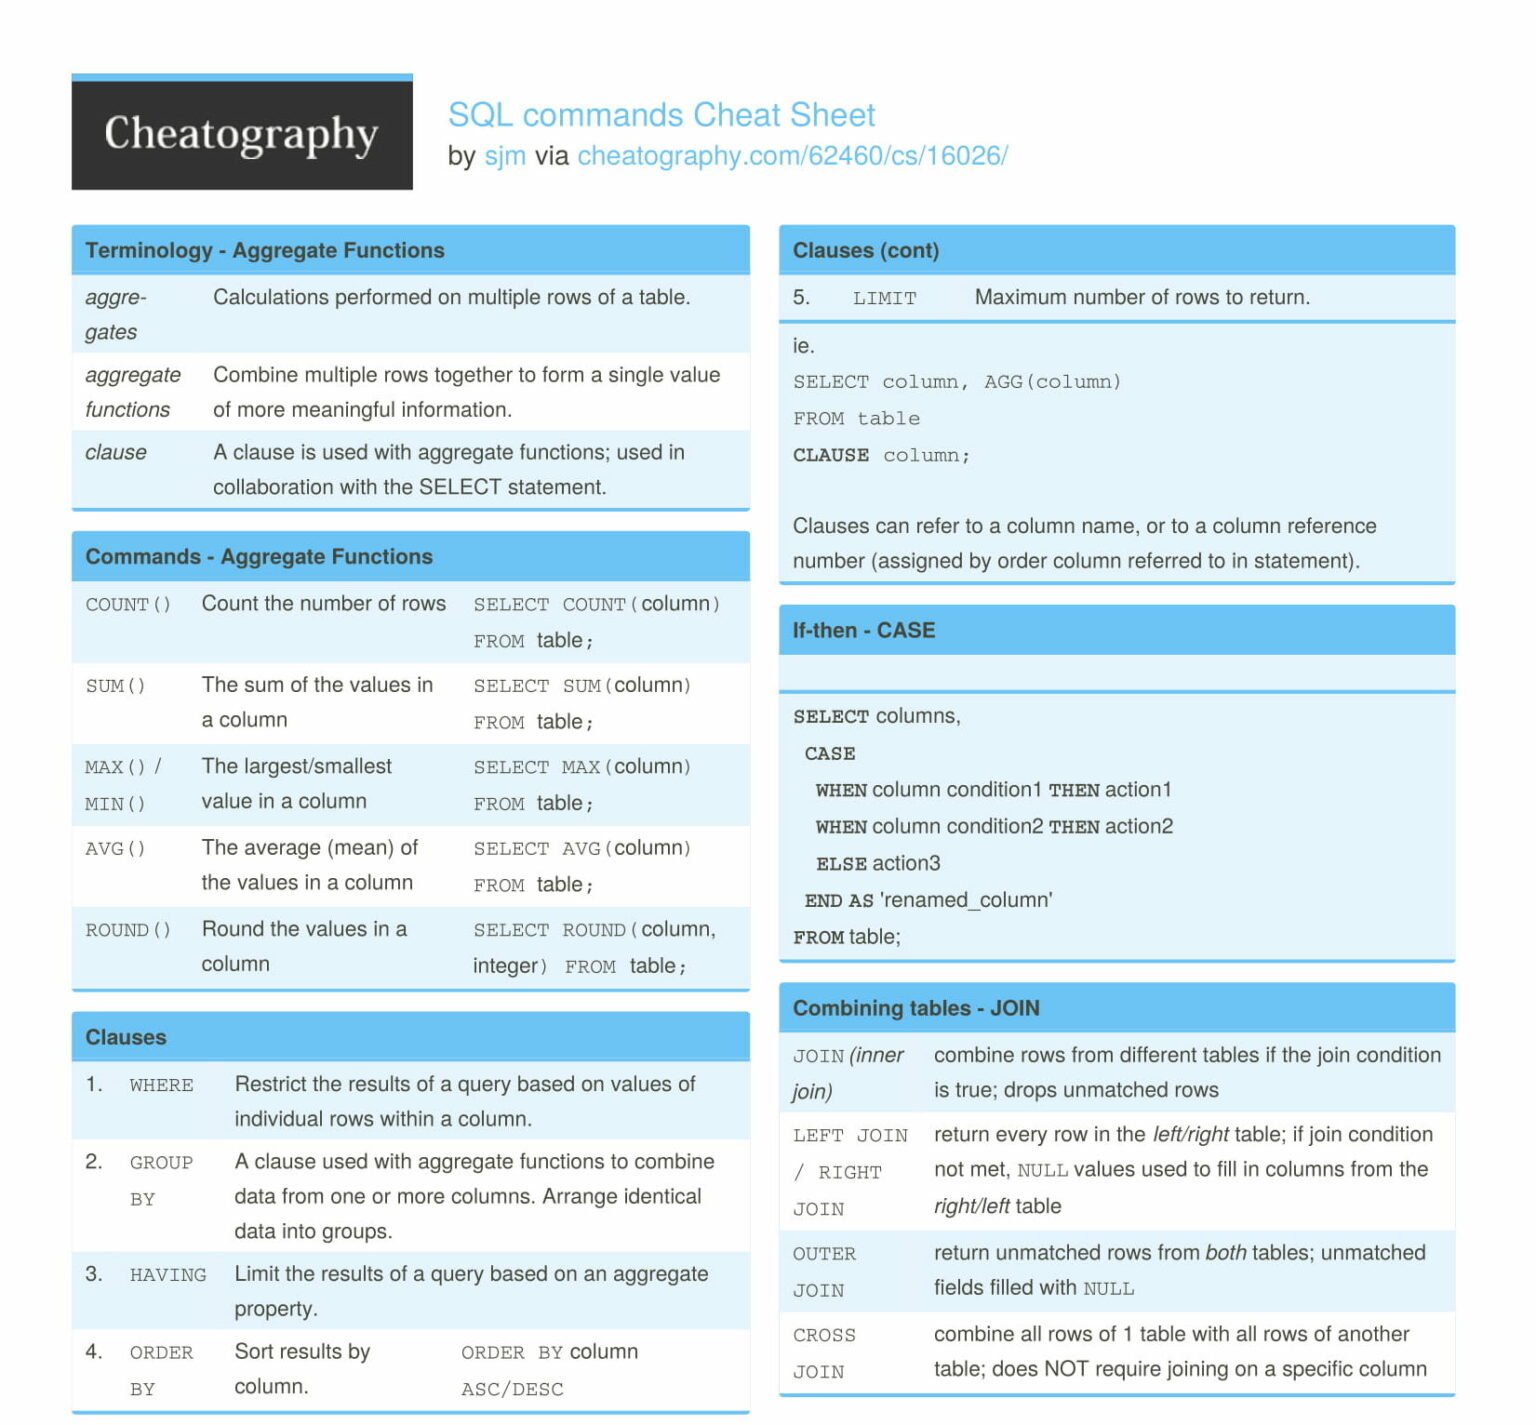 SQL Commands Cheat Sheet by Cheatography